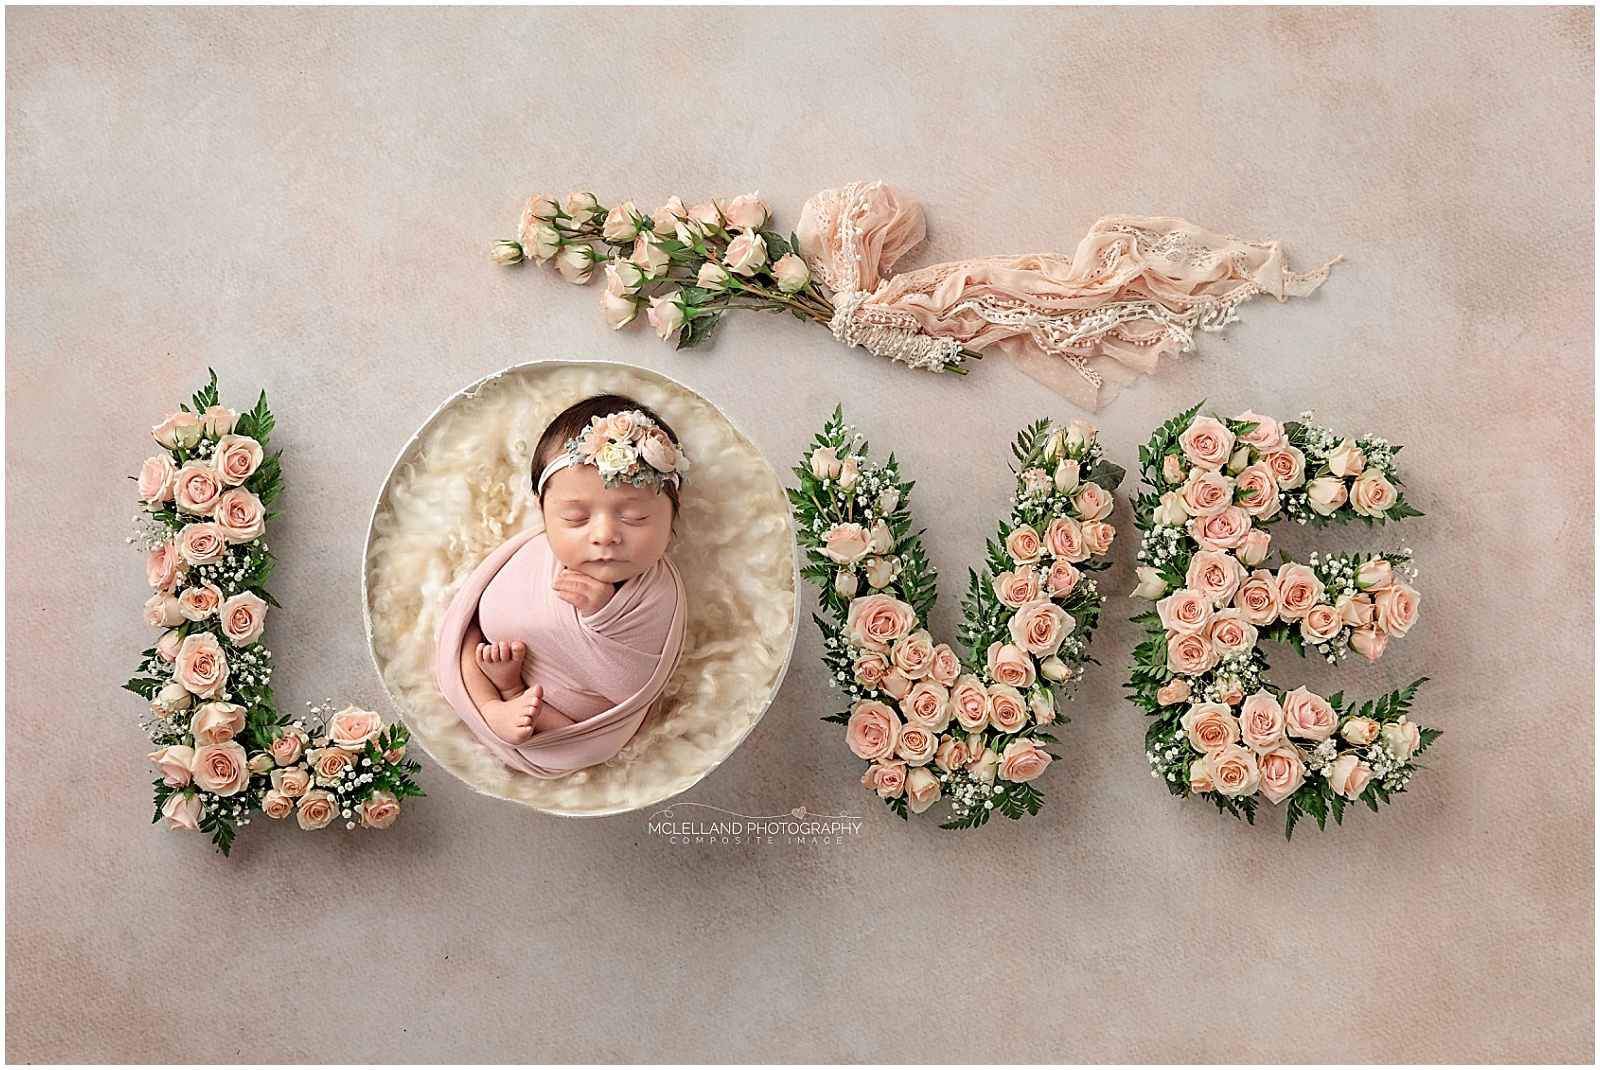 This newborn composite was created by combining two images together in Photoshop